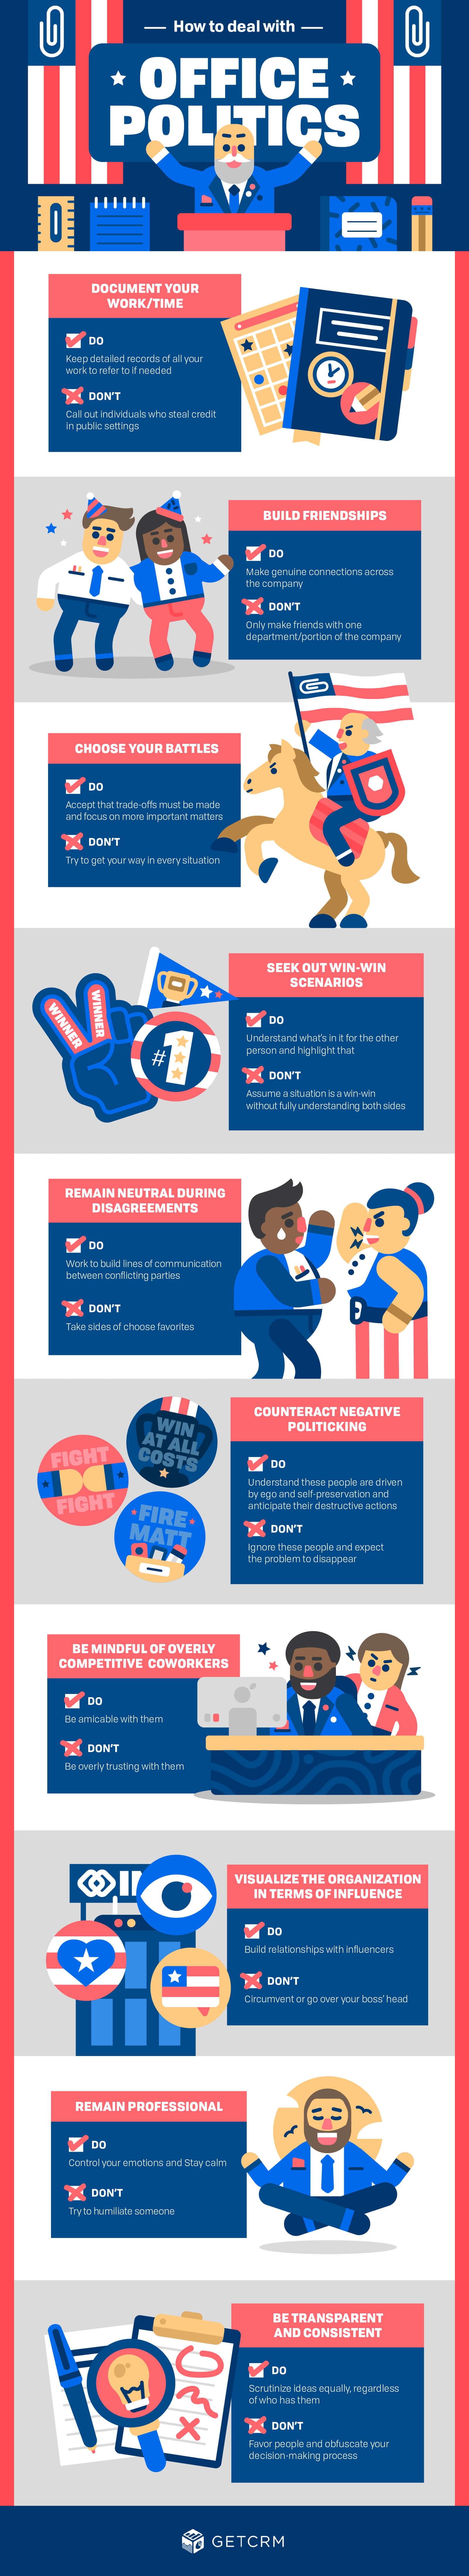 office politics how to deal in workplace infographic